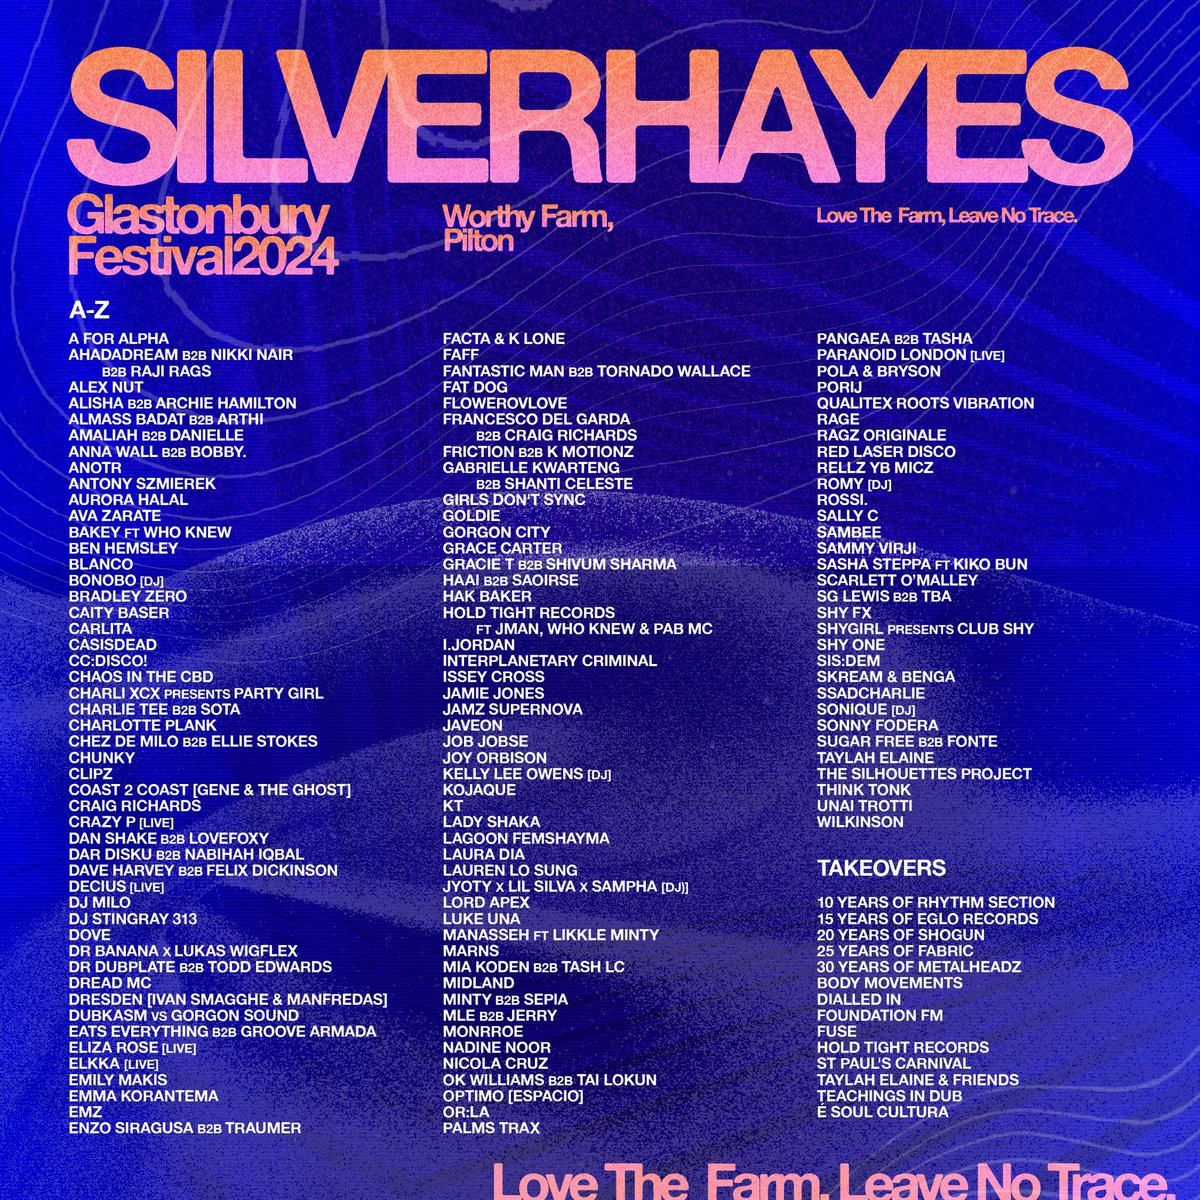 I used to see Silver Hayes as something of an afterthought, but these past few festivals it’s turned into possibly my favourite area and an alternative to the madness of the South East Corner. They’re smashing it every year 👏🏻 Can’t wait 😛 #Glastonbury #Glasto @silver_hayes